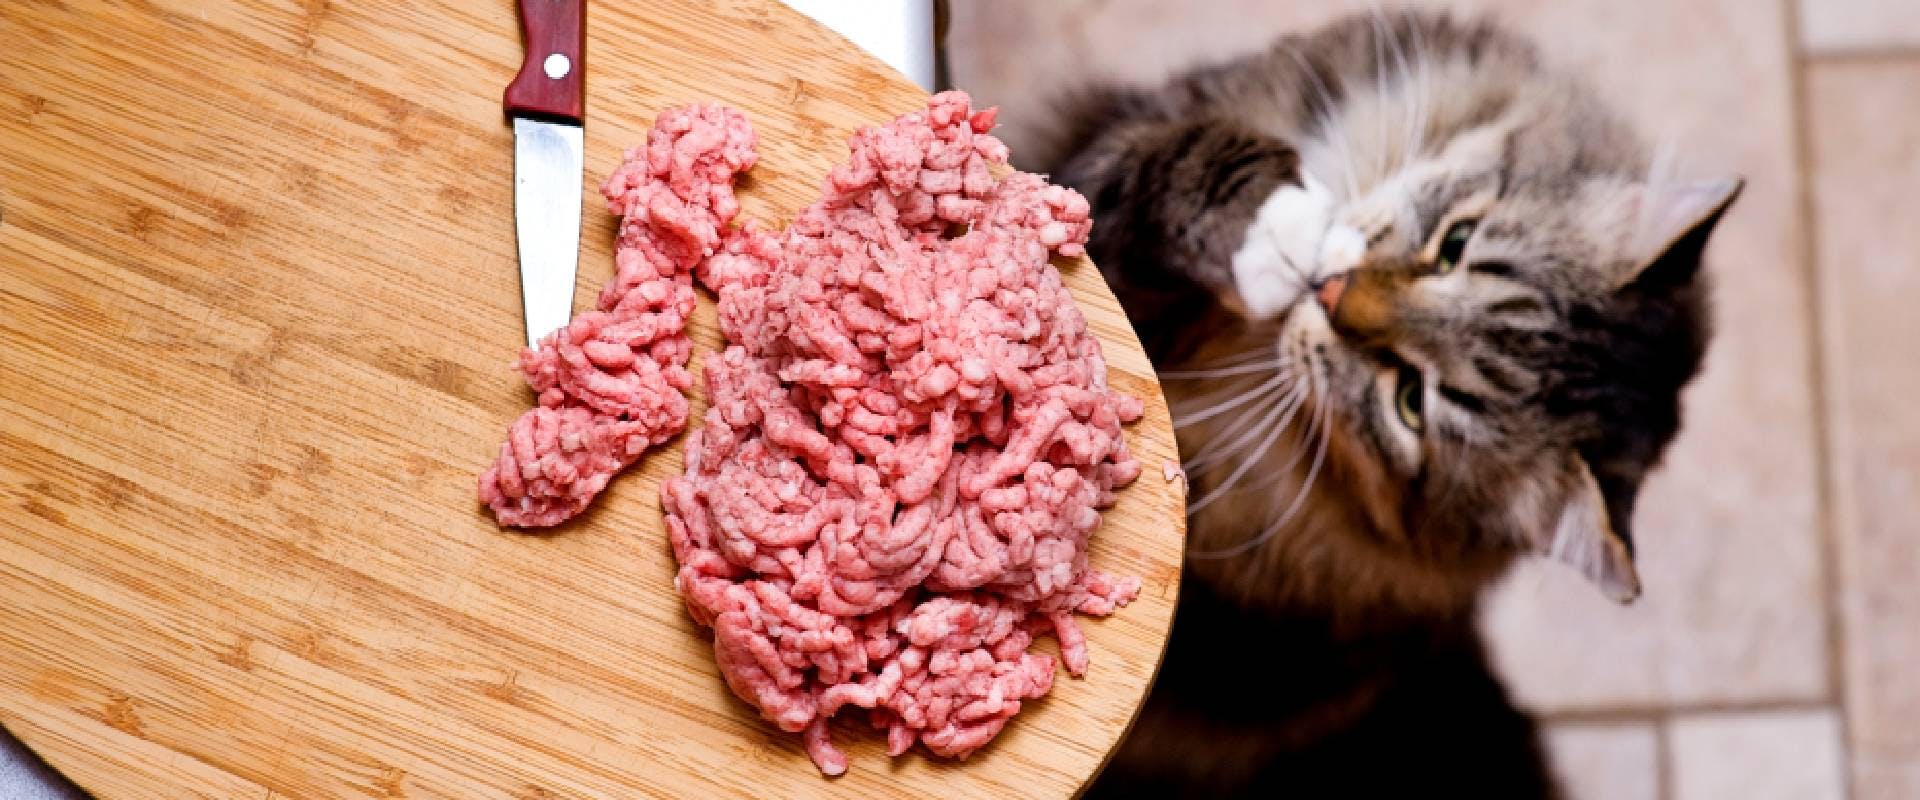 Cat begging for raw pork mince